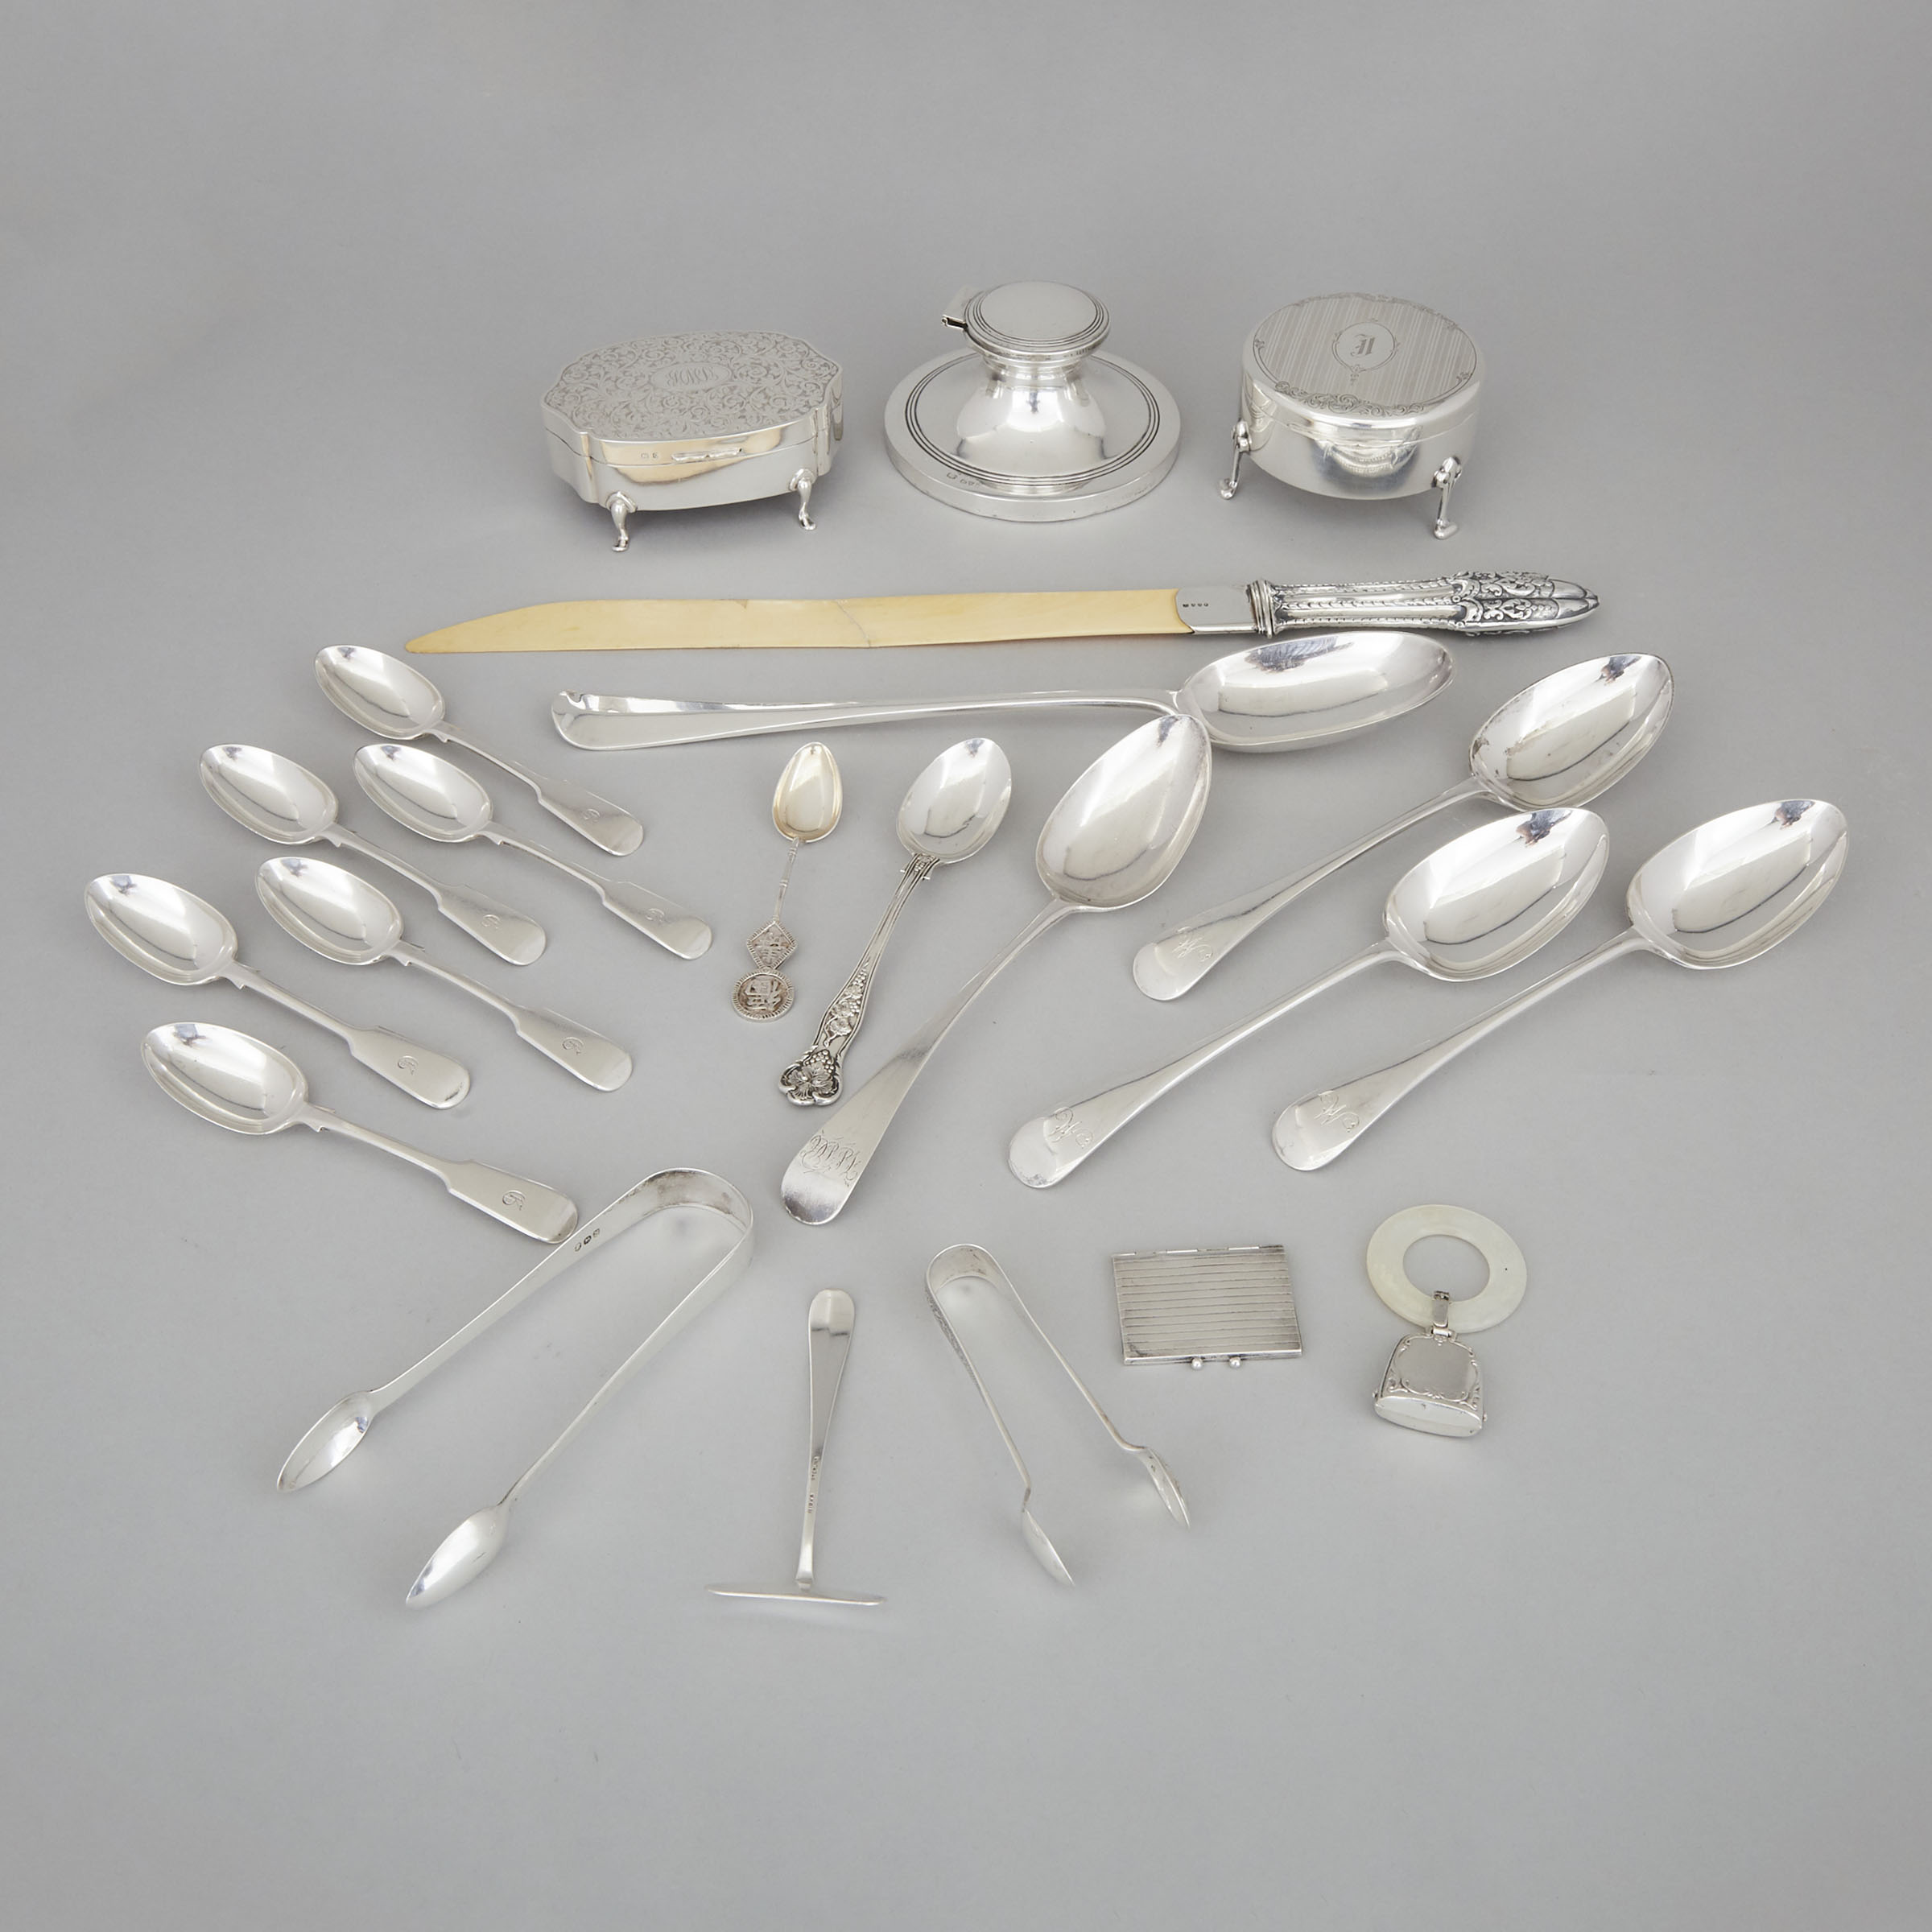 Group of Mainly English and North American Silver, late 18th-20th century